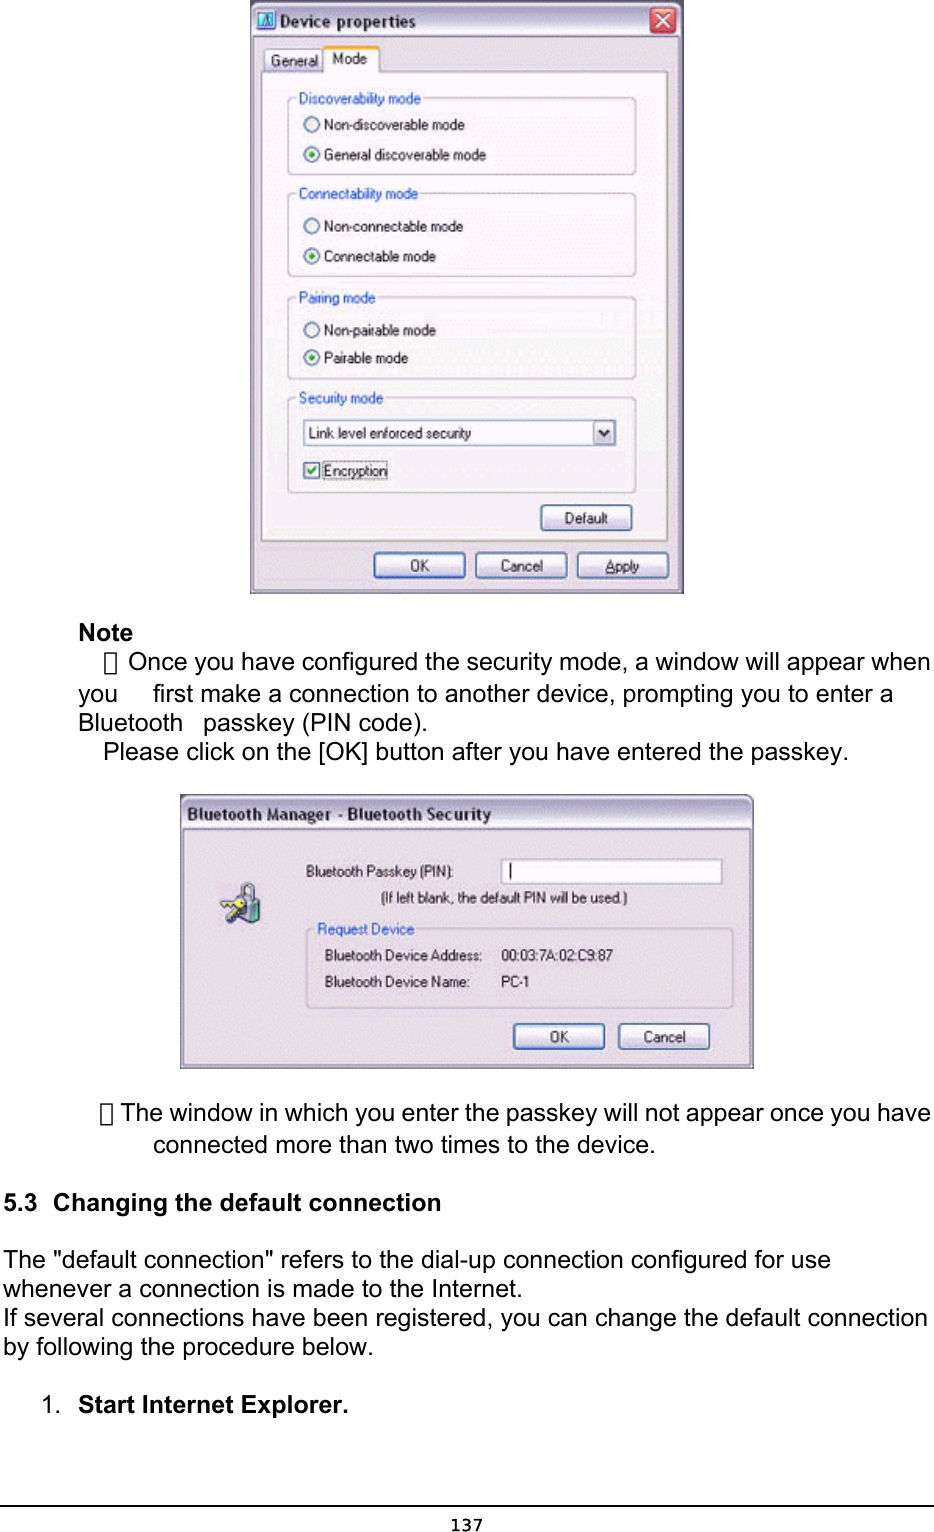   Note  ．Once you have configured the security mode, a window will appear when you    first make a connection to another device, prompting you to enter a Bluetooth   passkey (PIN code).   Please click on the [OK] button after you have entered the passkey.     ．The window in which you enter the passkey will not appear once you have       connected more than two times to the device. 5.3  Changing the default connection The &quot;default connection&quot; refers to the dial-up connection configured for use whenever a connection is made to the Internet. If several connections have been registered, you can change the default connection by following the procedure below. 1.  Start Internet Explorer.  137